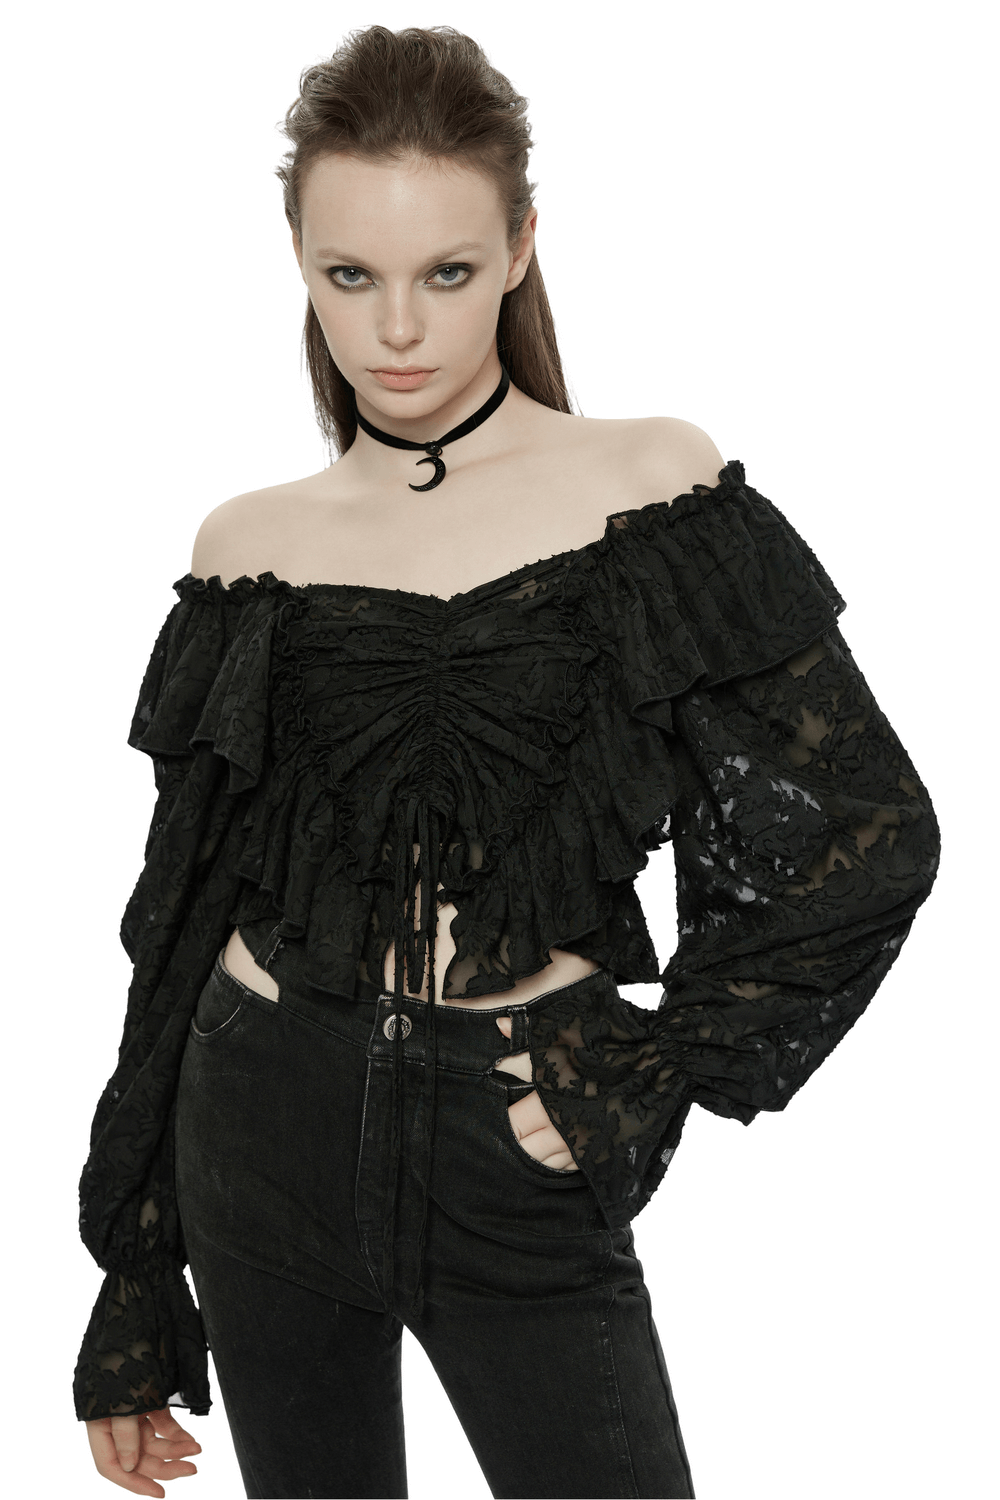 Black Square Neck Sheer Lace Top with Ruffle Sleeves